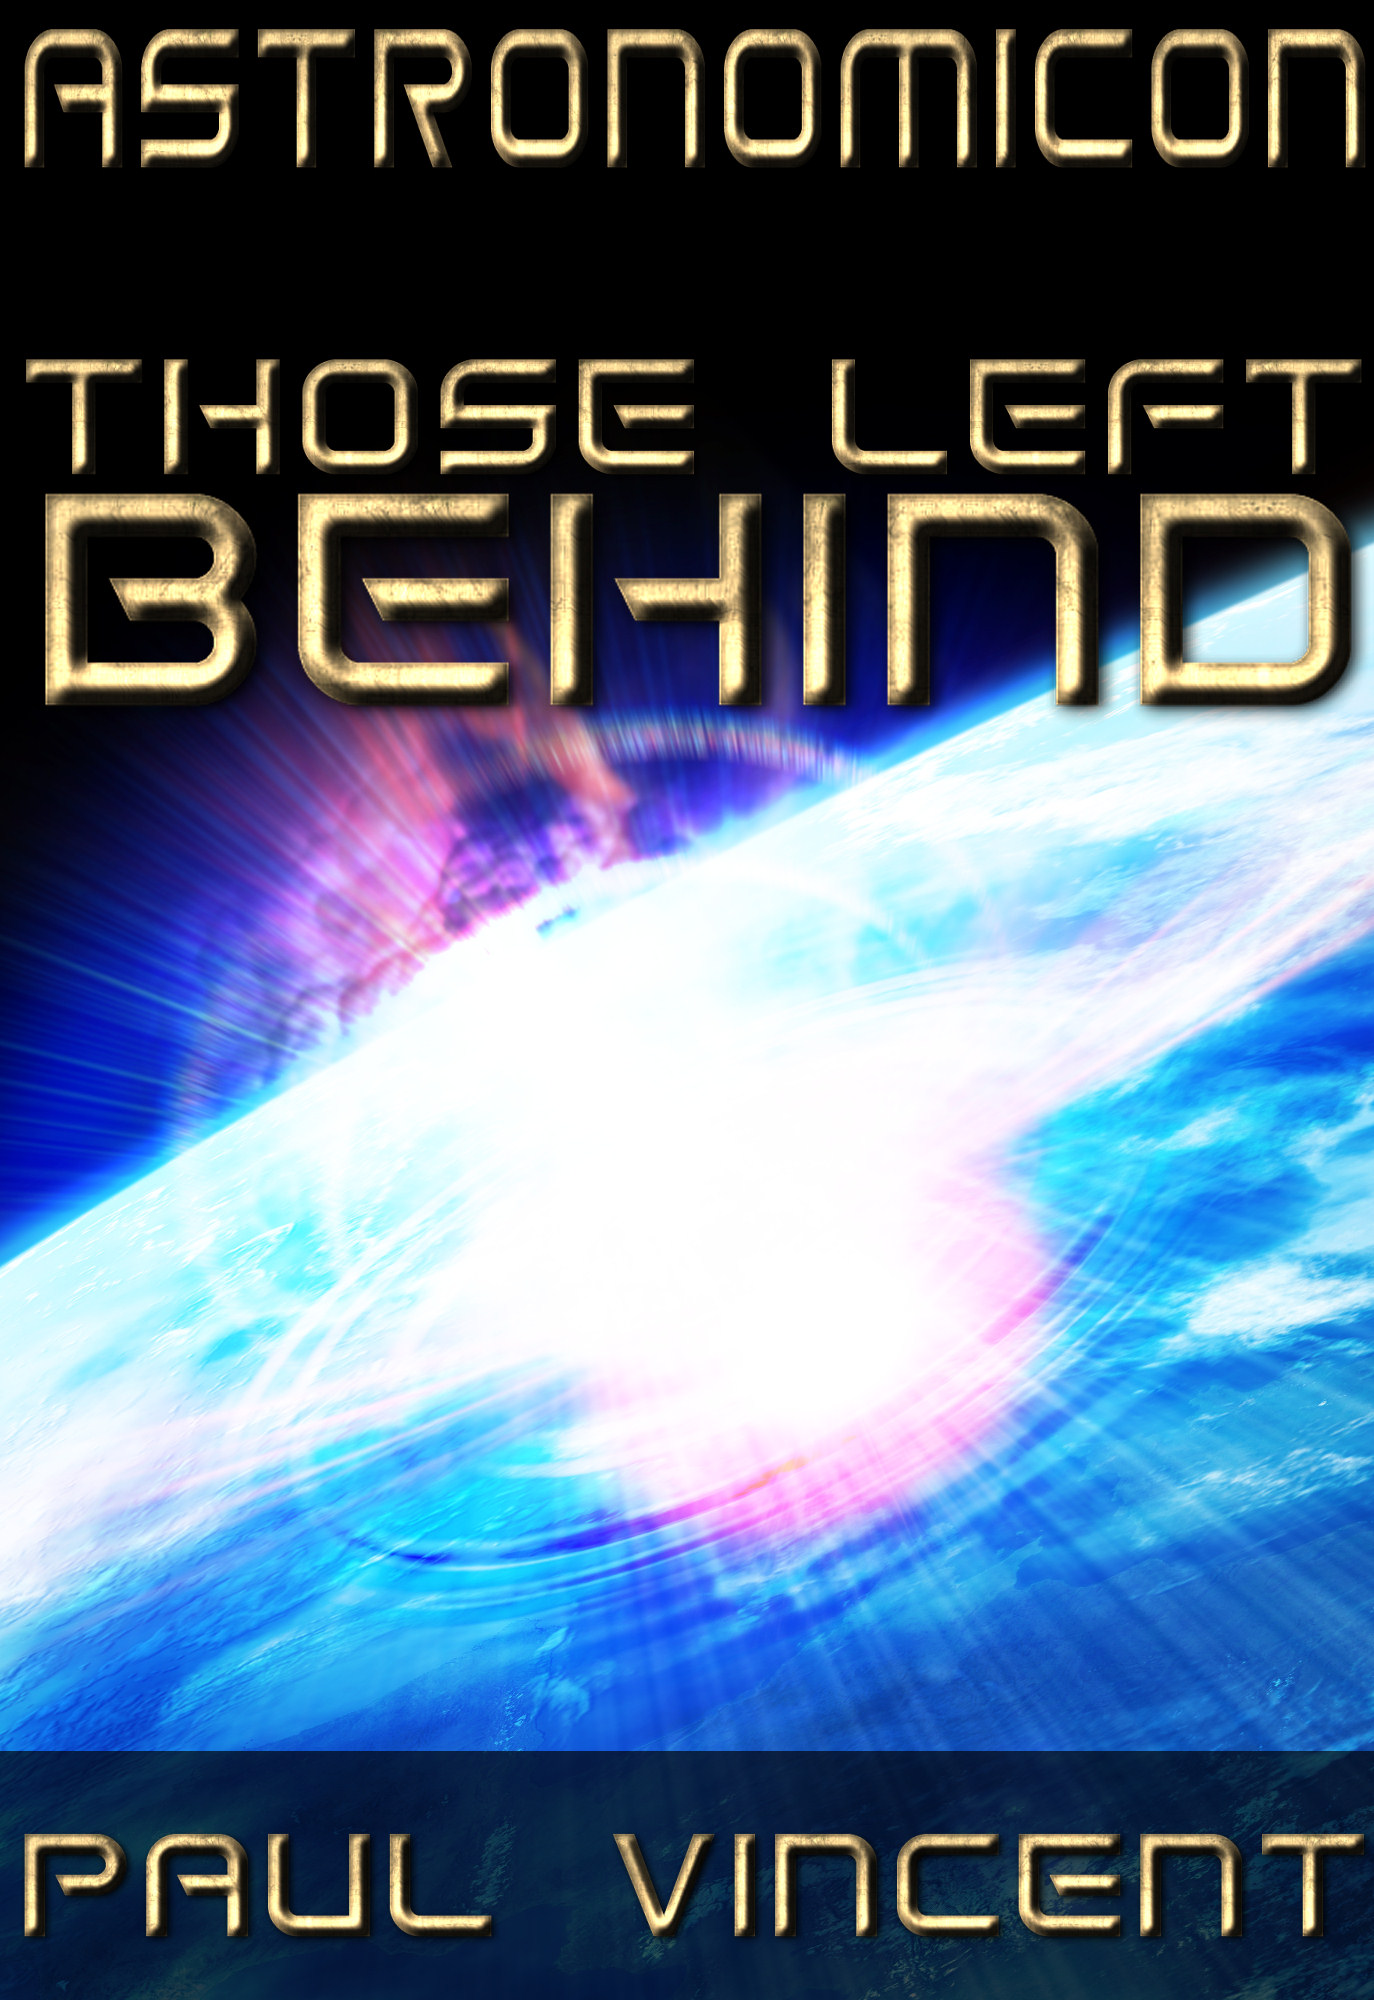 Those Left Behind - front cover art